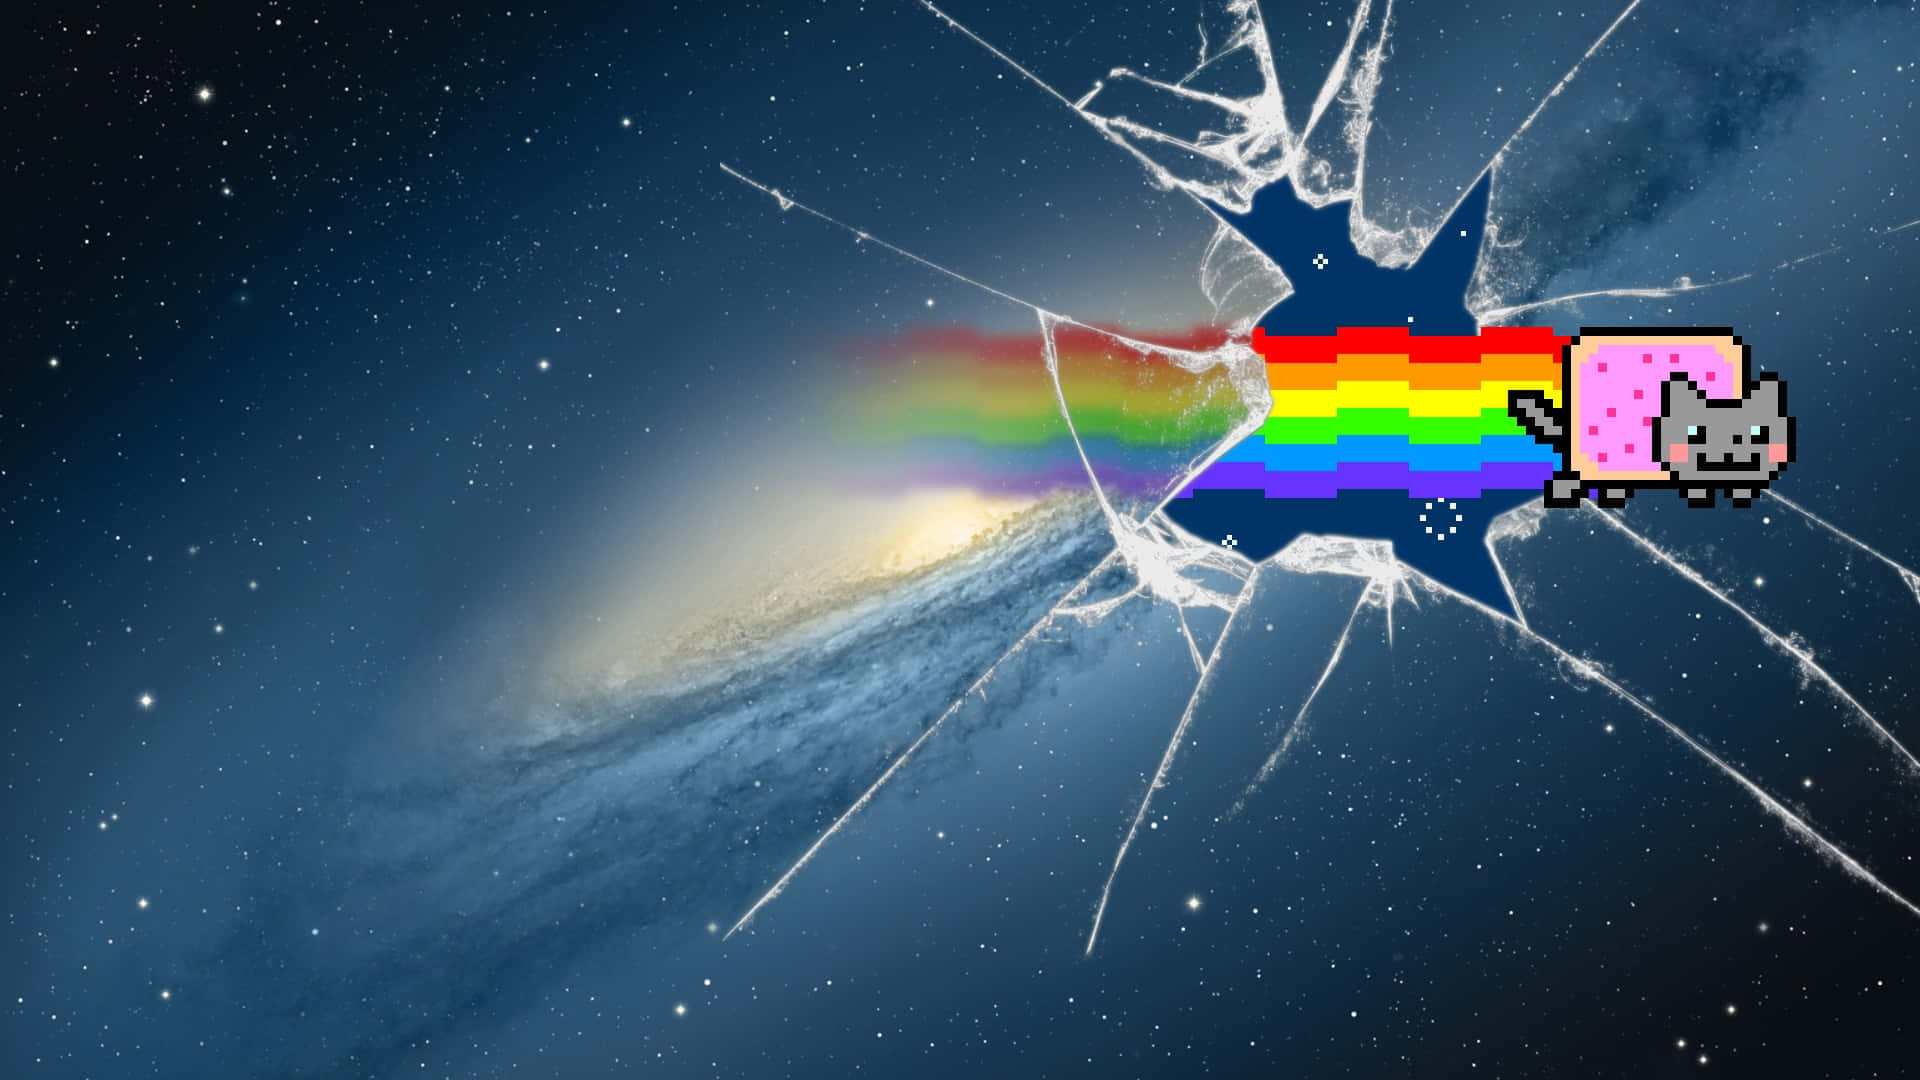 Nyan Cat flying through space with a rainbow trail